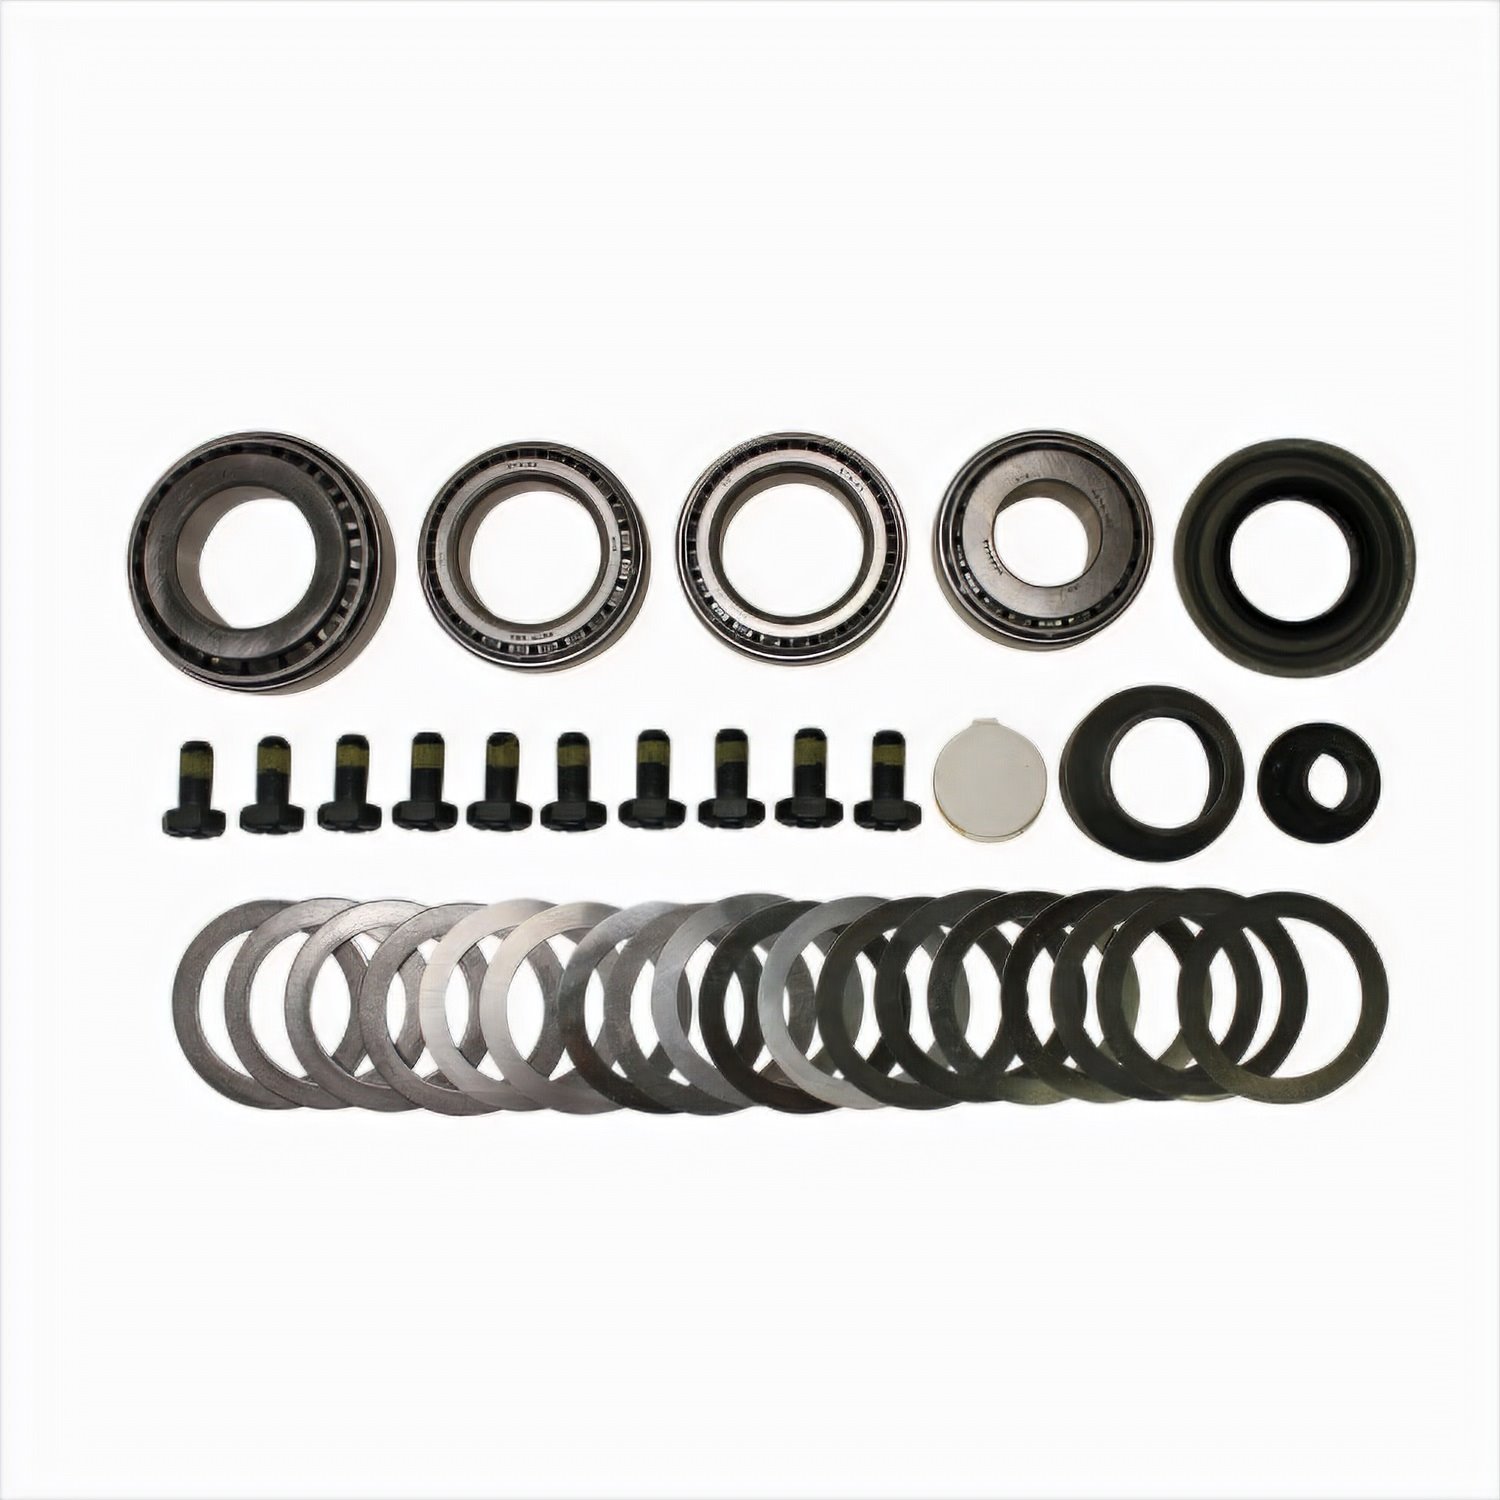 8.8" Complete Ring & Pinion Installation Kit